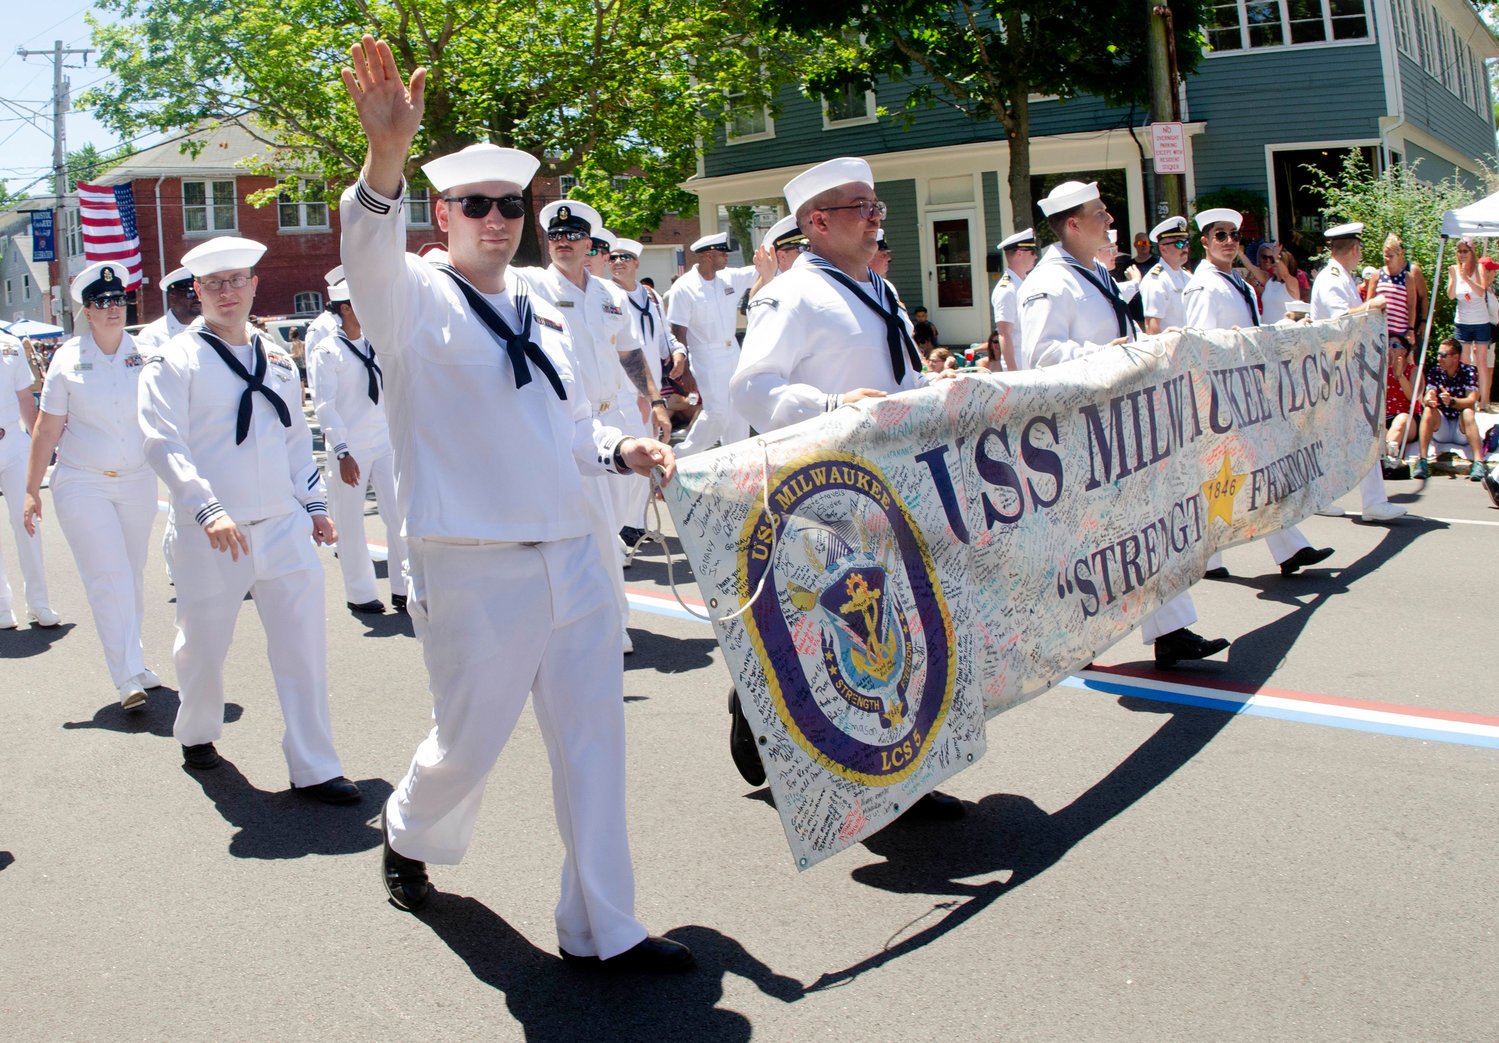 Members of the USS Milwaukee march down High Street.